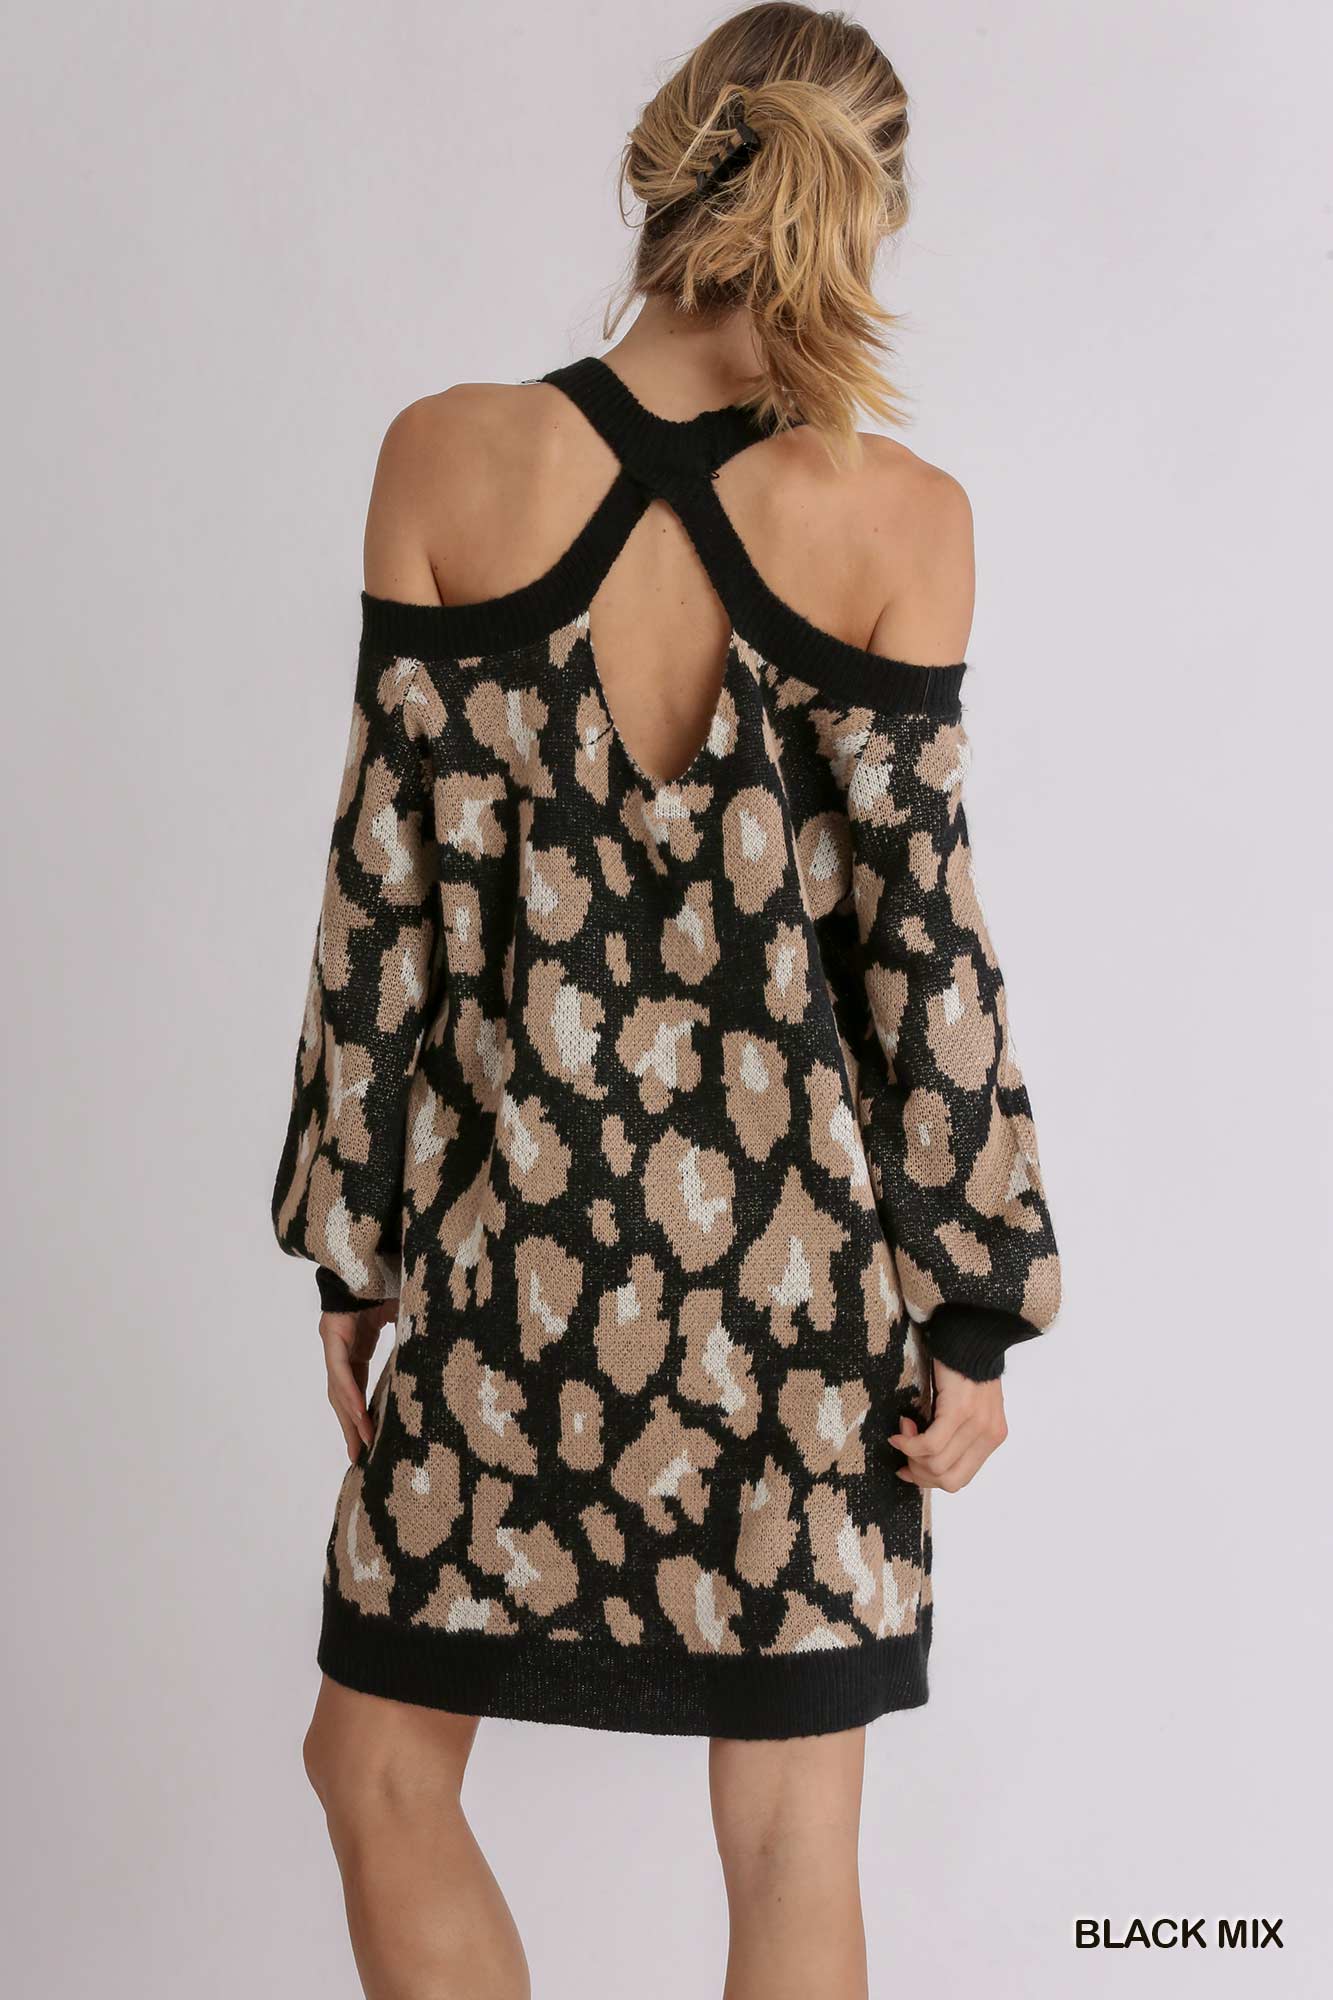 Umgee Camel Mix Brushed Animal Print Cold Shoulder Sweater Open Back Dress - Roulhac Fashion Boutique